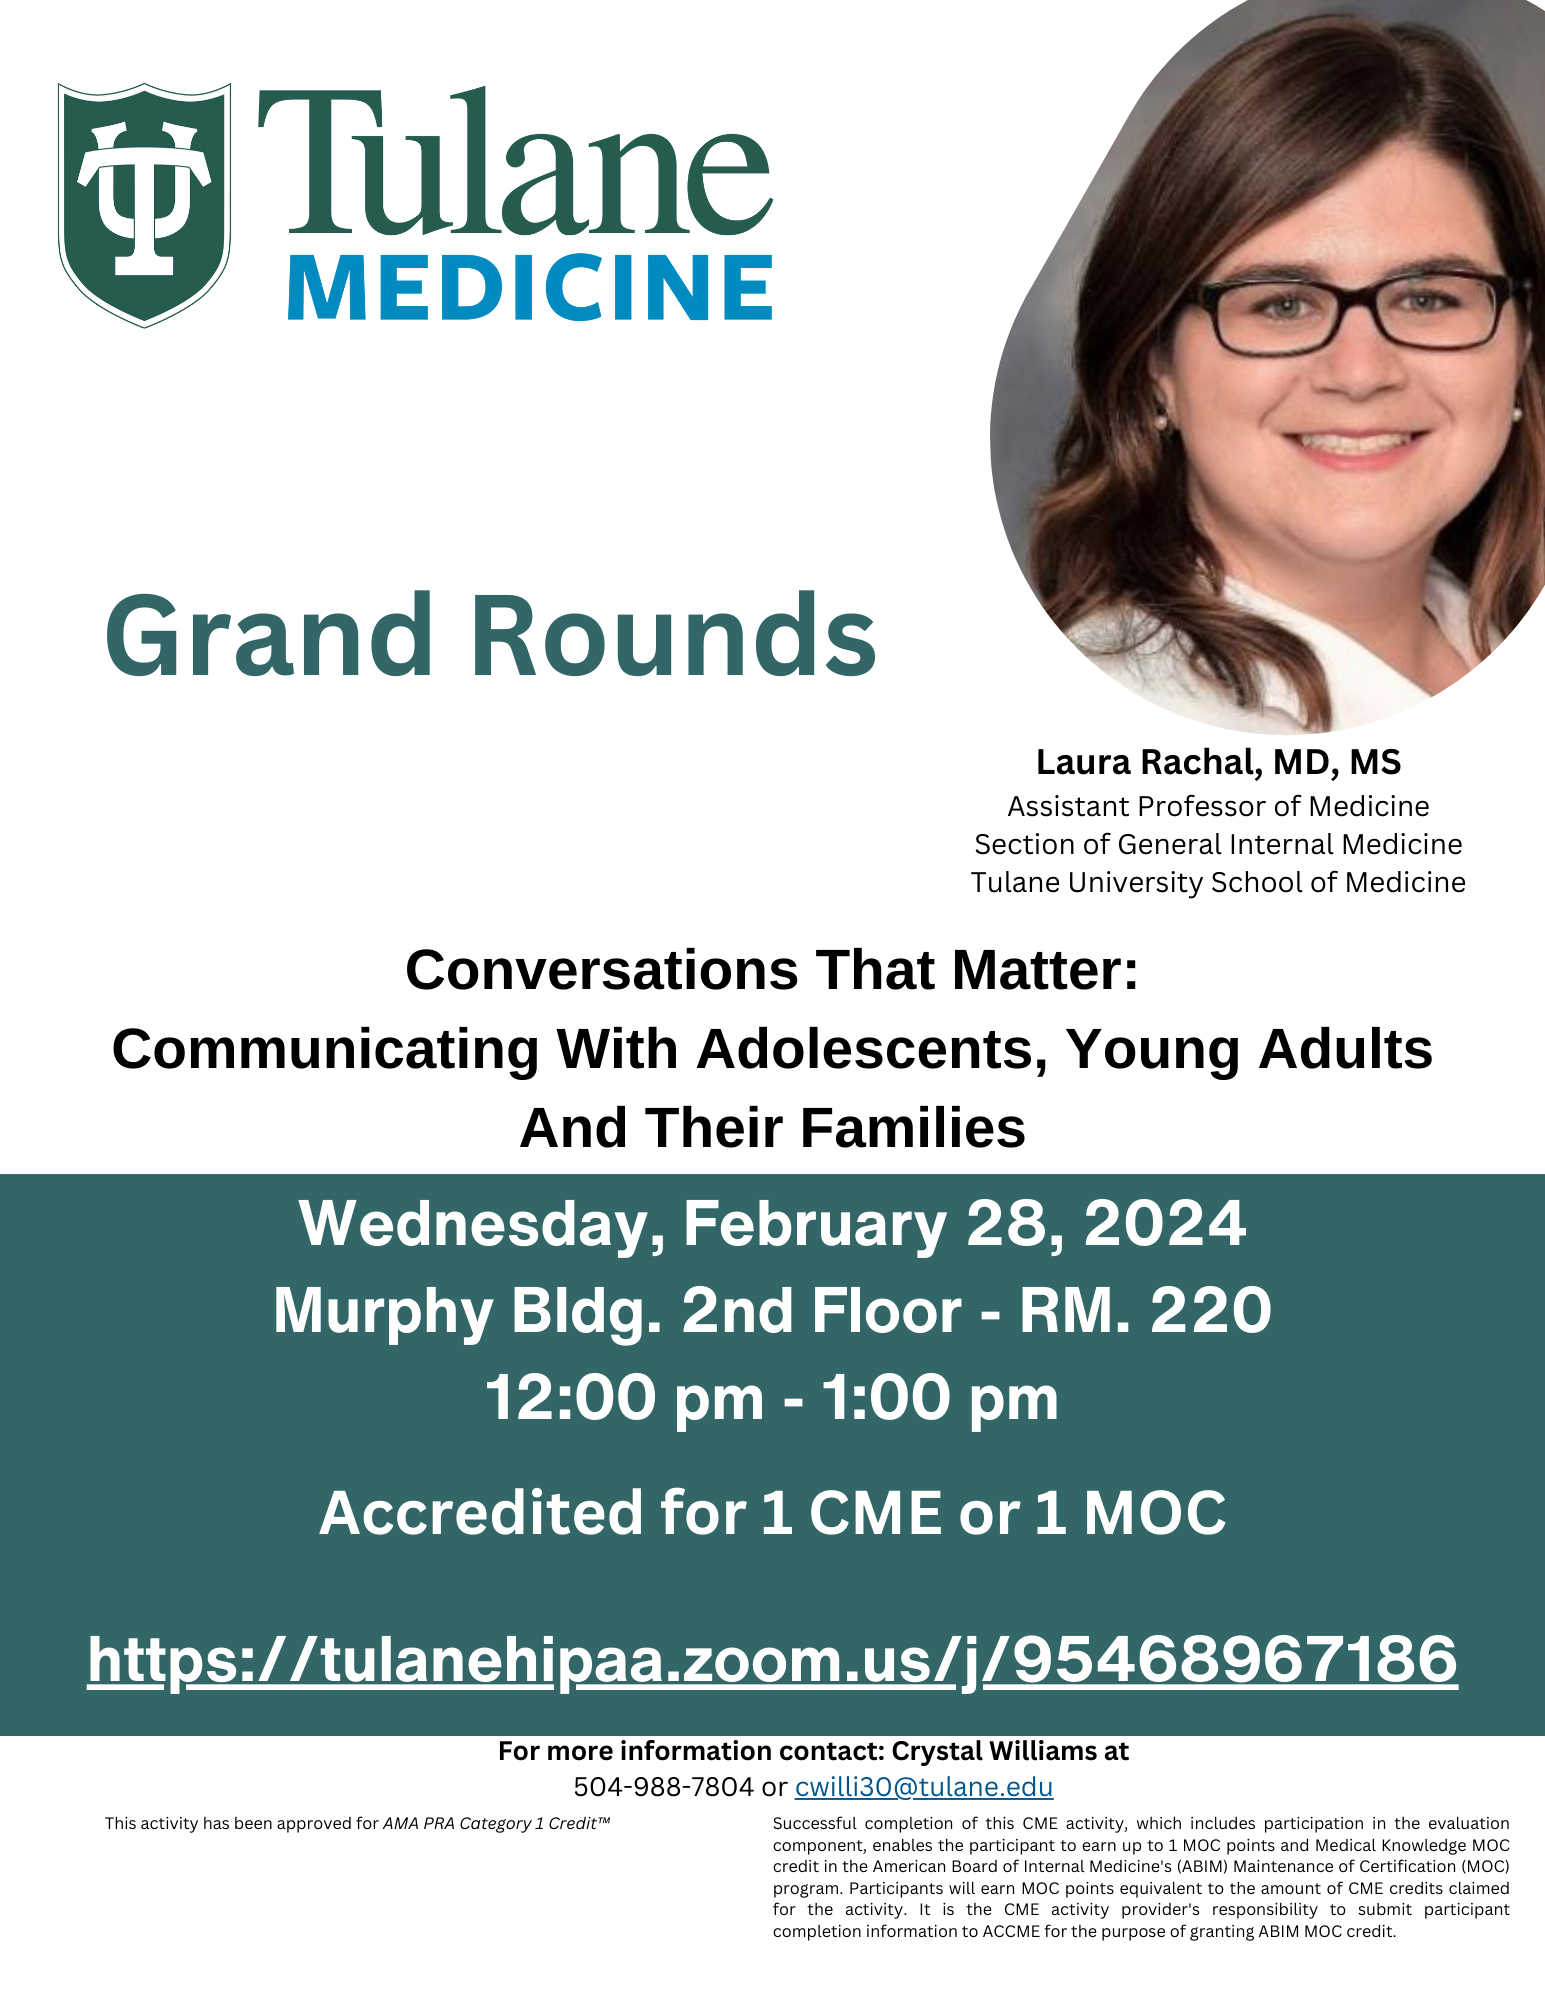 2.28.24 Grand Rounds